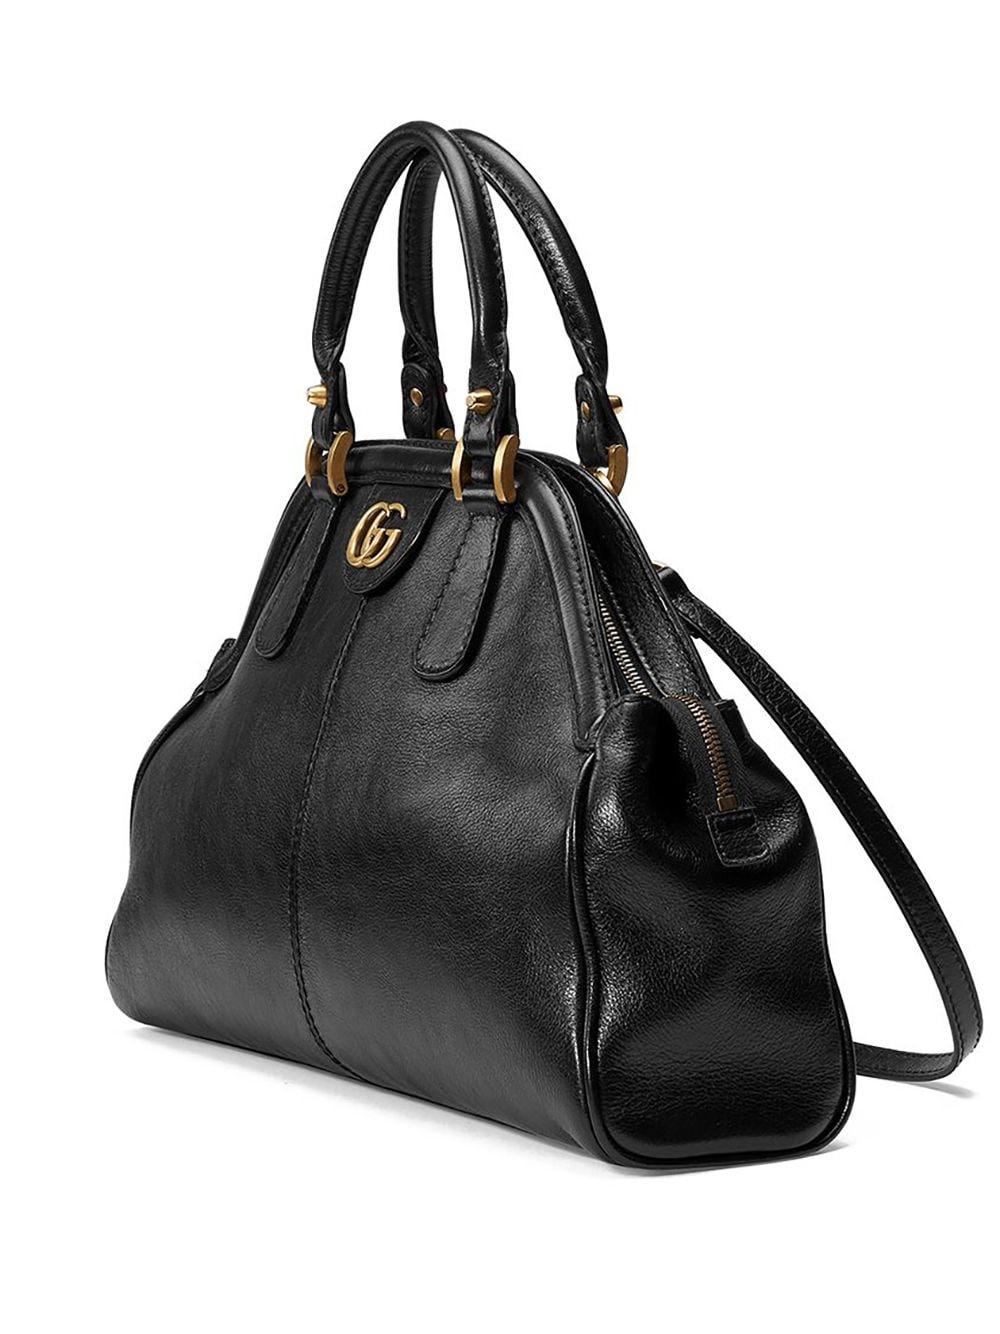 Gucci Leather Re(belle) Medium Top Handle Tote in Black Leather (Black) |  Lyst